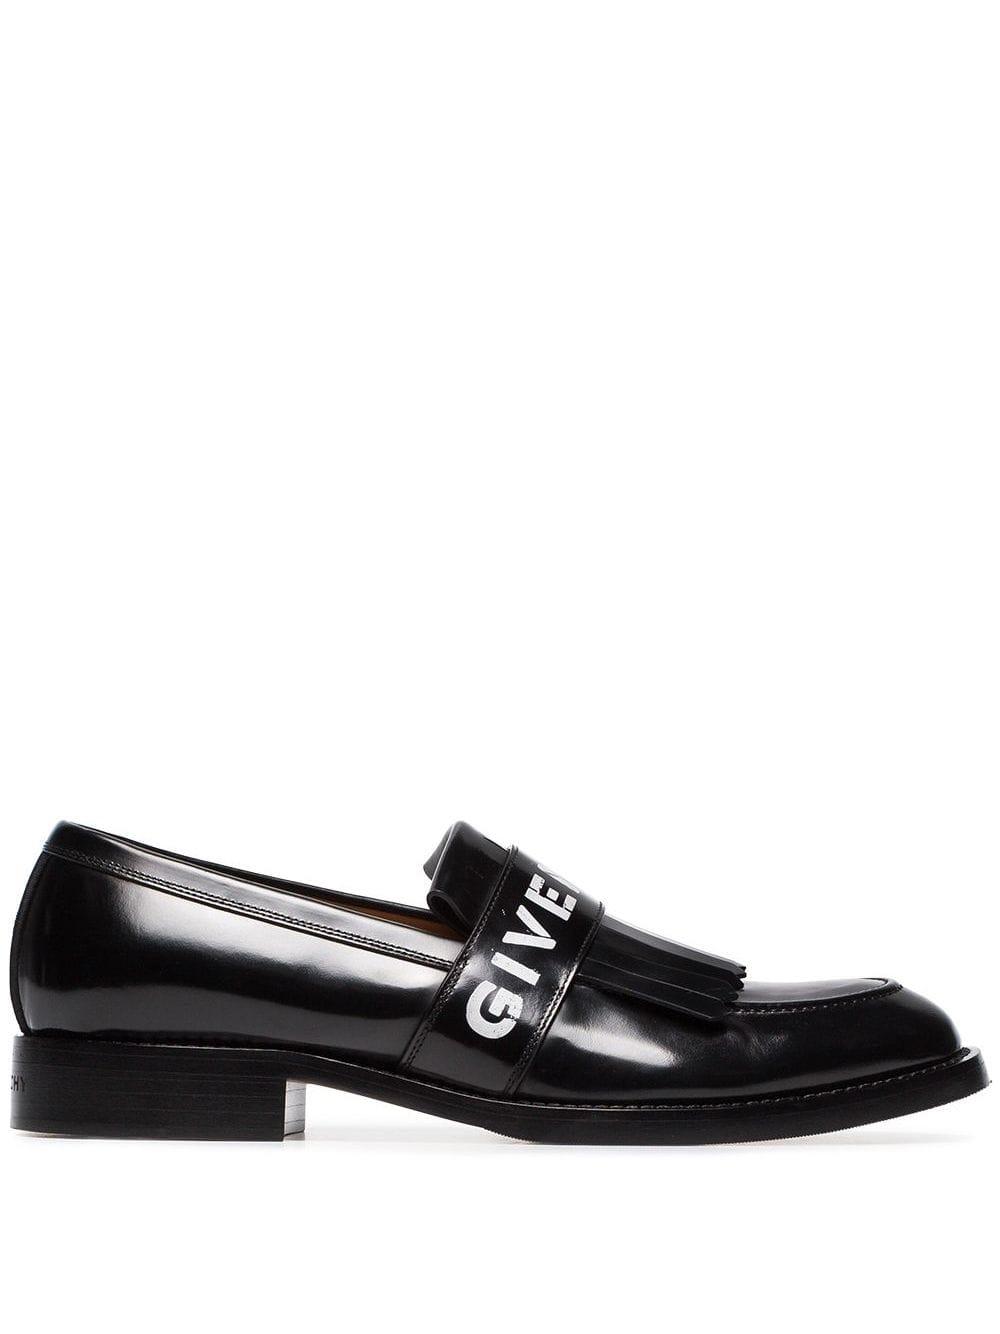 Givenchy Logo Fringe Leather Loafers in 